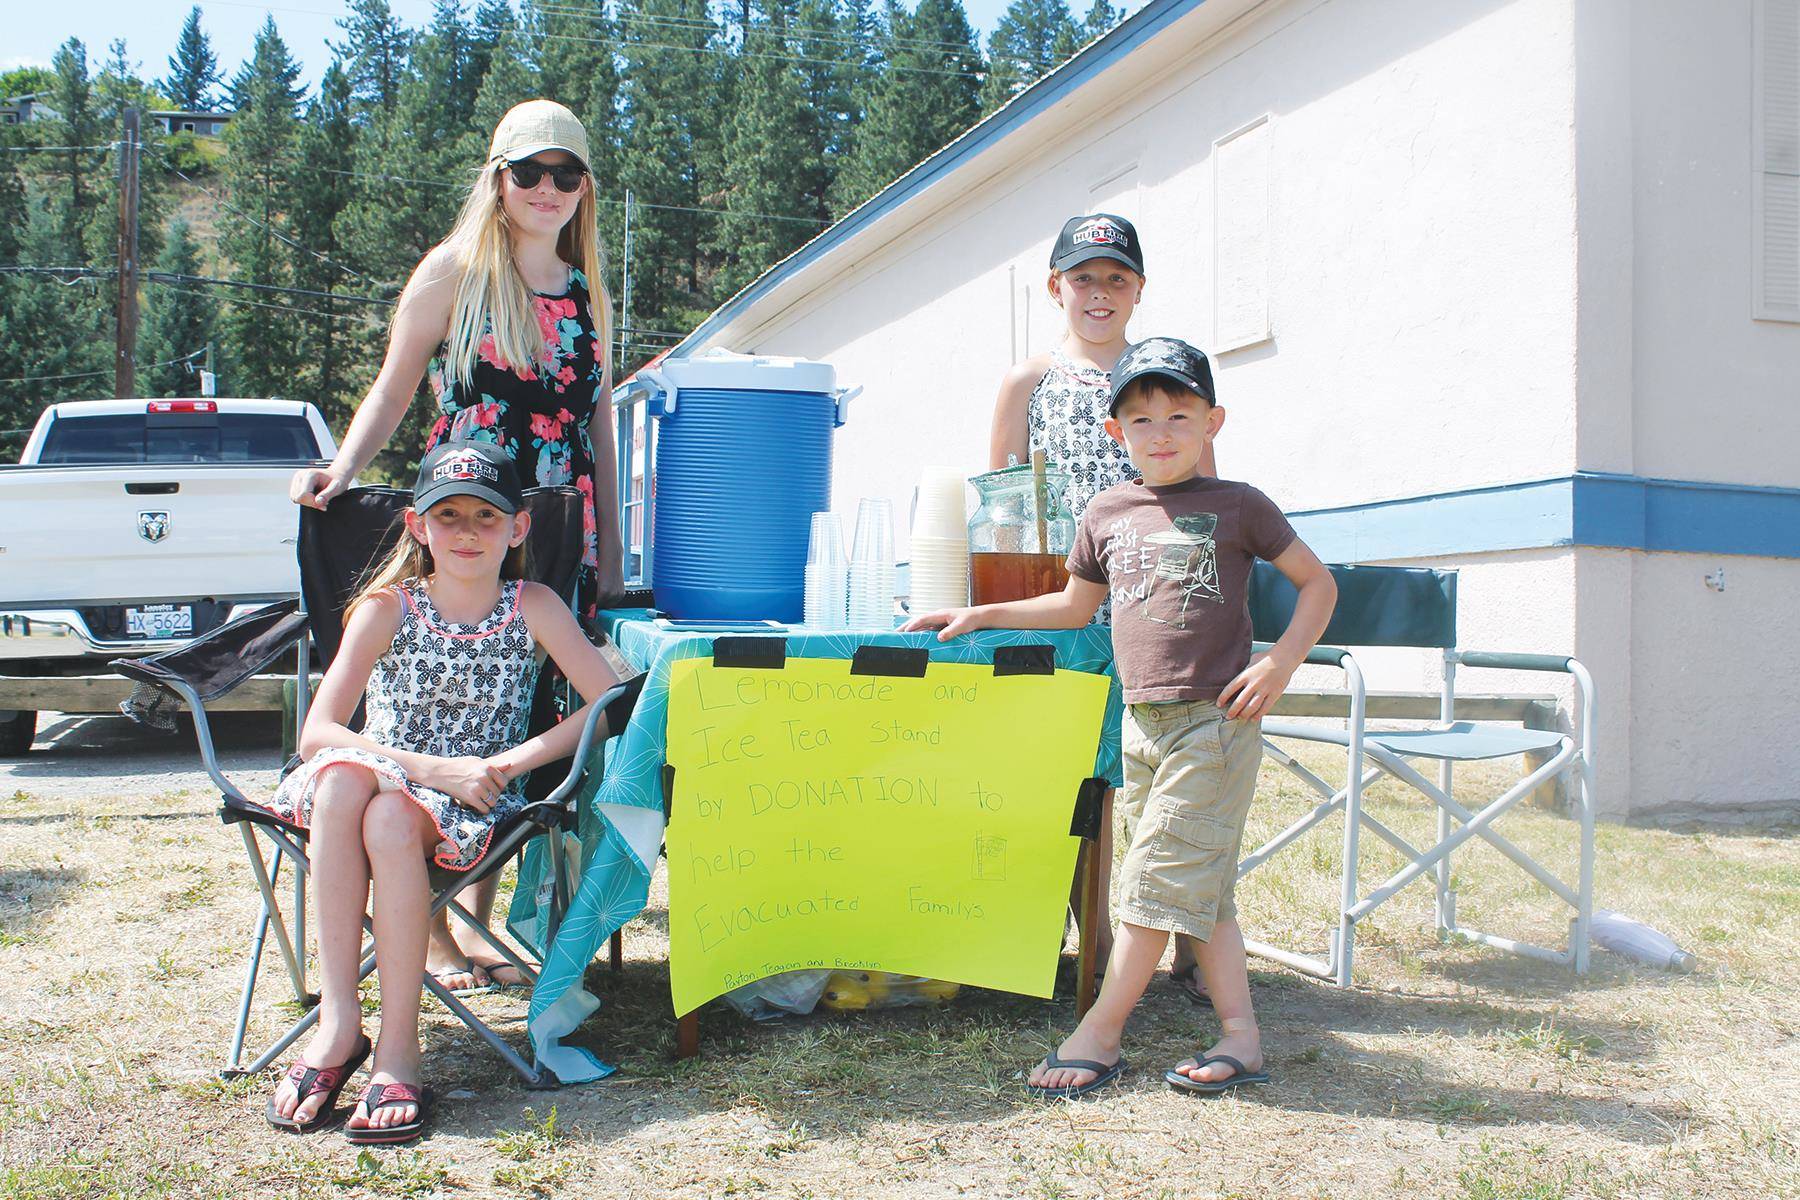 Brooklyn and Bentley Banks, and Teagan and Payton Cranston of Princeton were running a lemonade stand to raise funds for fire evacuees. Similkameen Spotlight editor Andrea DeMeer said they solemnly handed her a cup of iced tea (which was delicious) and said: “You don’t need money,” as she didn’t have her wallet. “We are here to help people.”